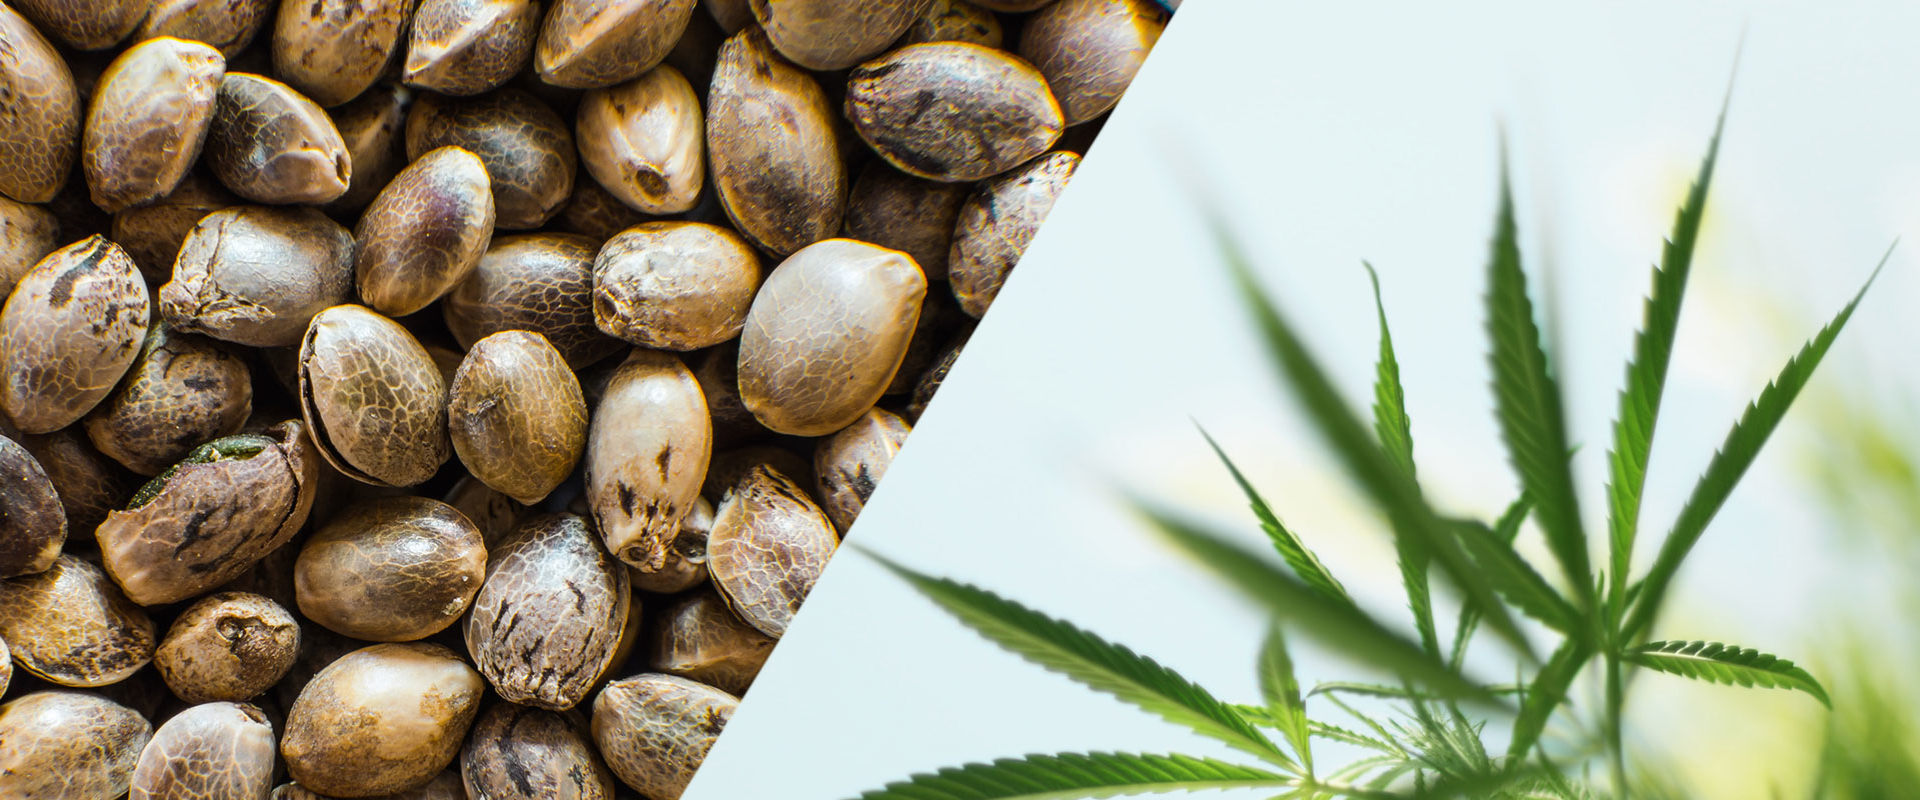 The Difference Between Hemp and CBD: What You Need to Know